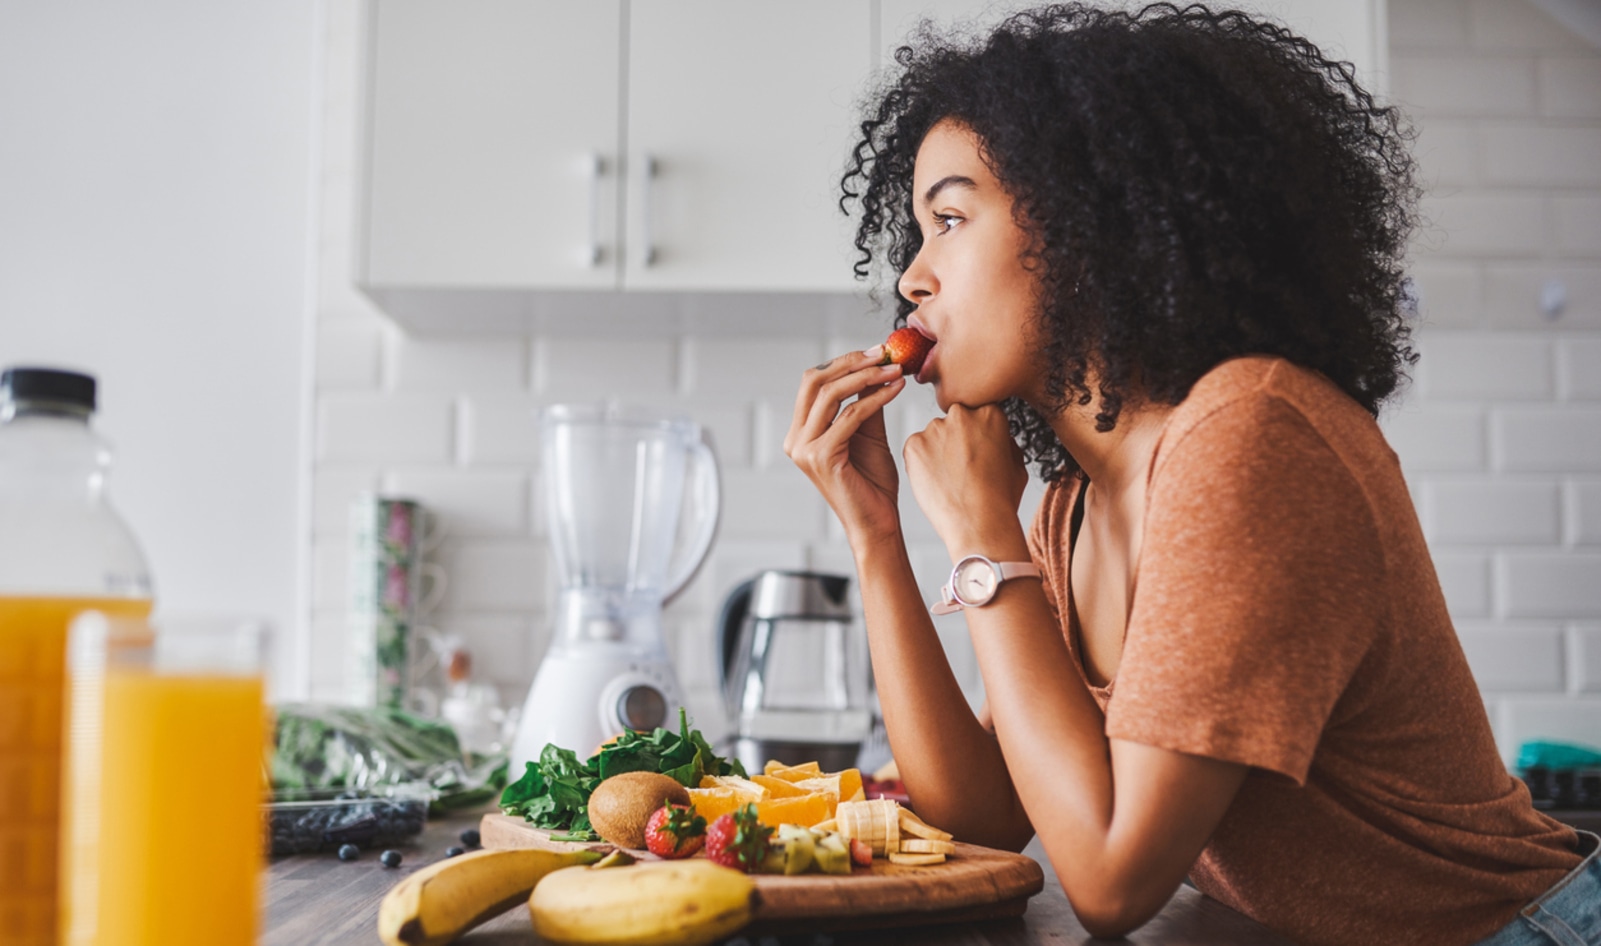 How to Eat for Cold and Flu Season, According to a Dietitian